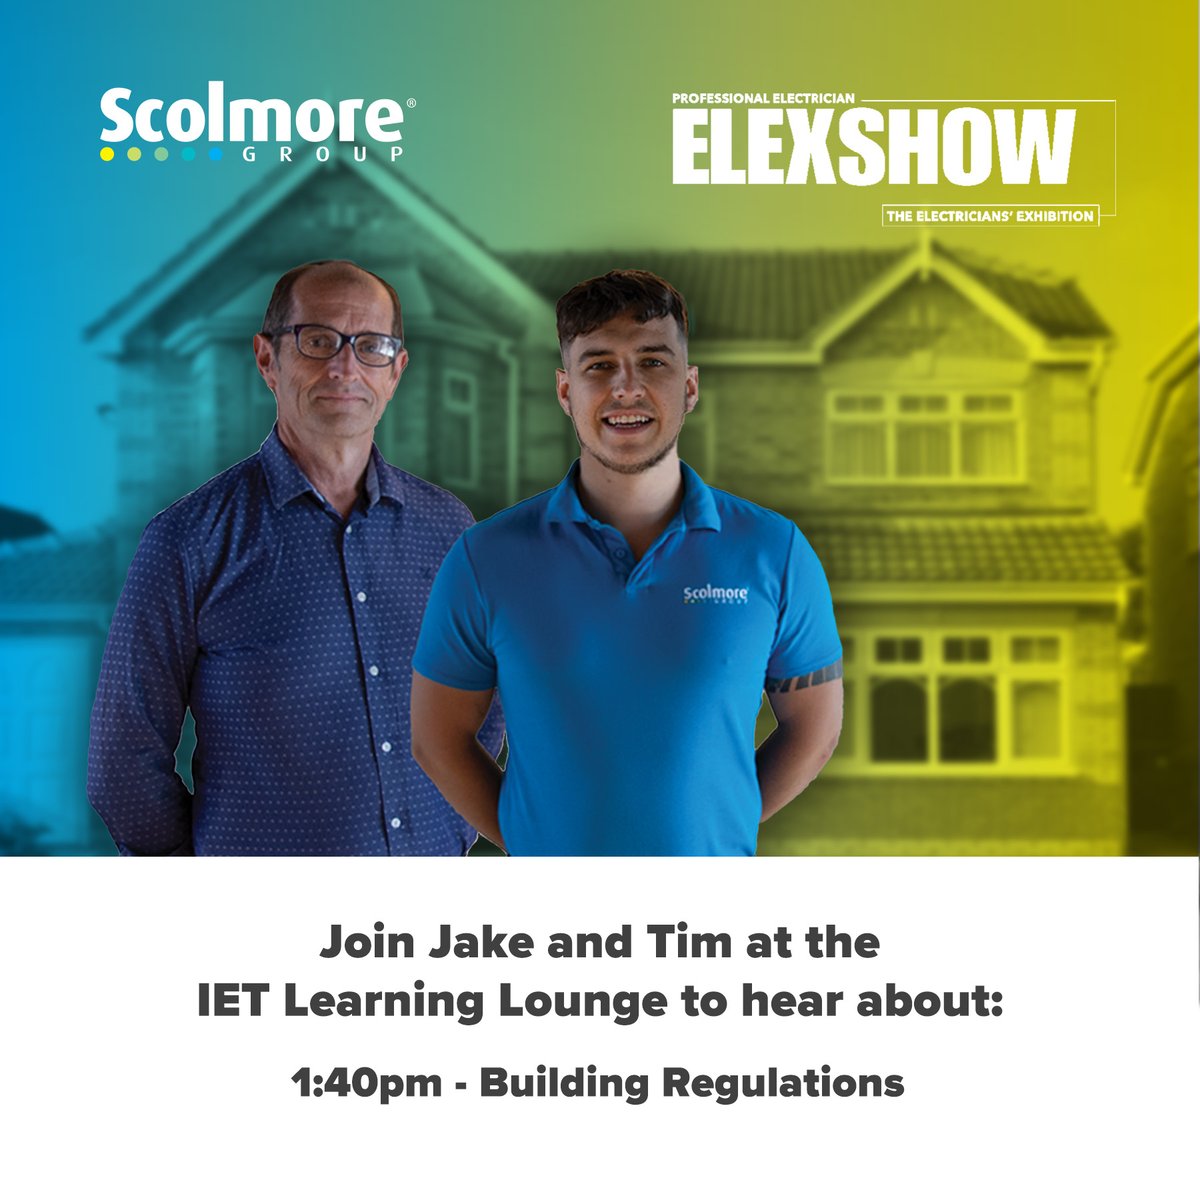 Make sure to visit the IET Learning Lounge at @Elexshow for a CPD-accredited talk from Jake and Tim about building regulations 🌇 Register for your FREE entry here 🔗 registration.hamerville.events/exf/no1pkpq5eu… #Elex #ElexShow #ClickScolmore #ElexHarrogate